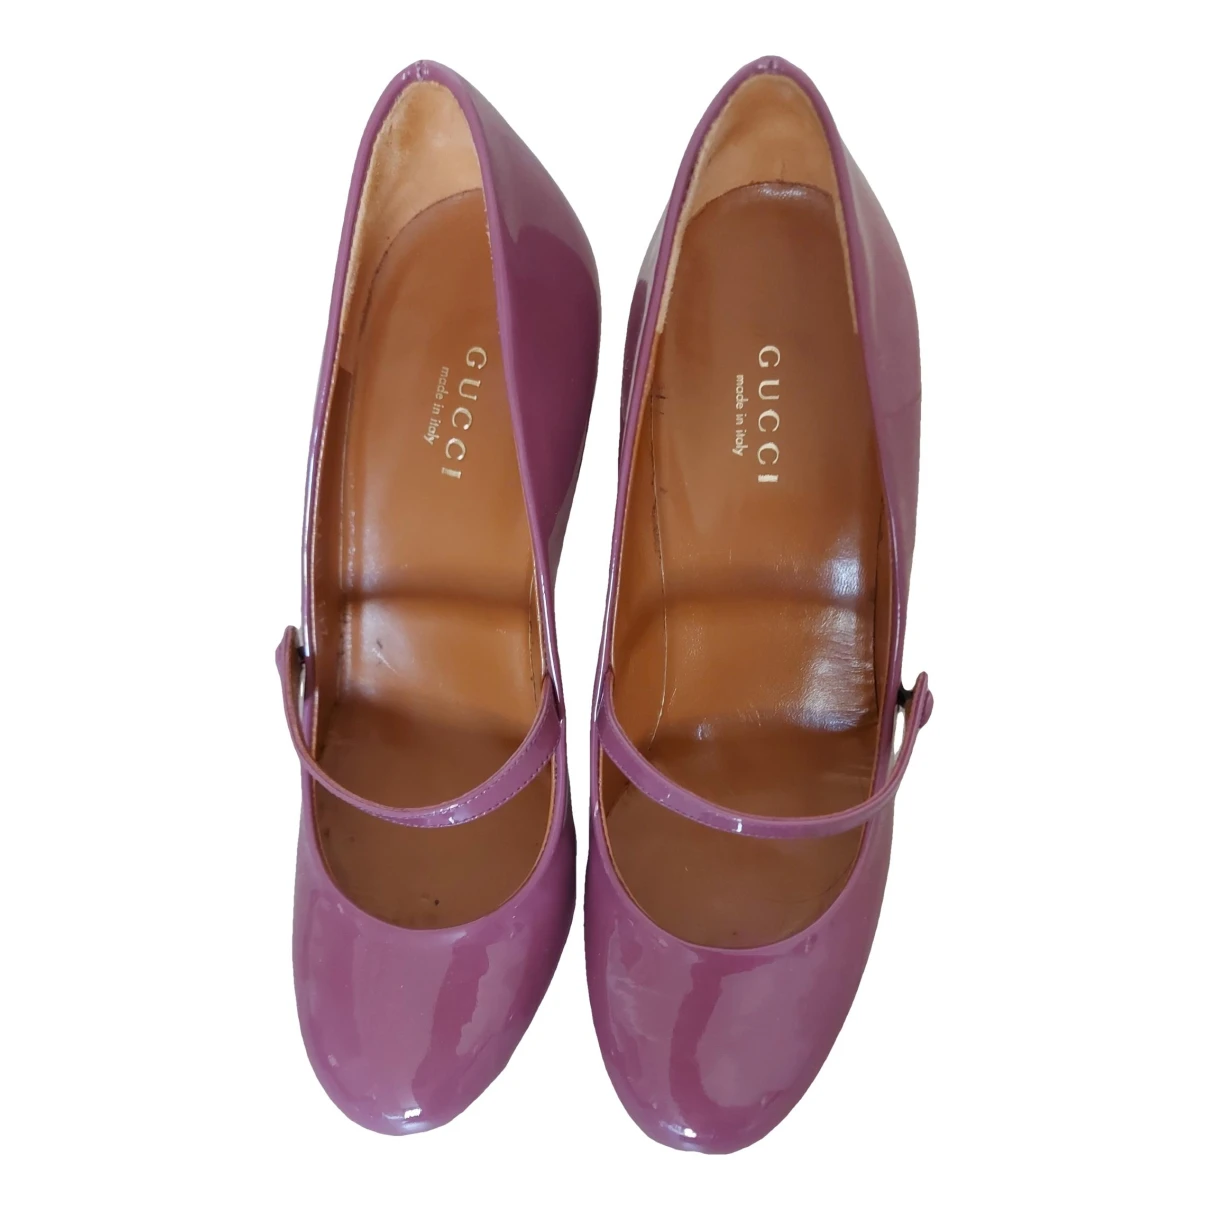 Pre-owned Gucci Patent Leather Heels In Pink